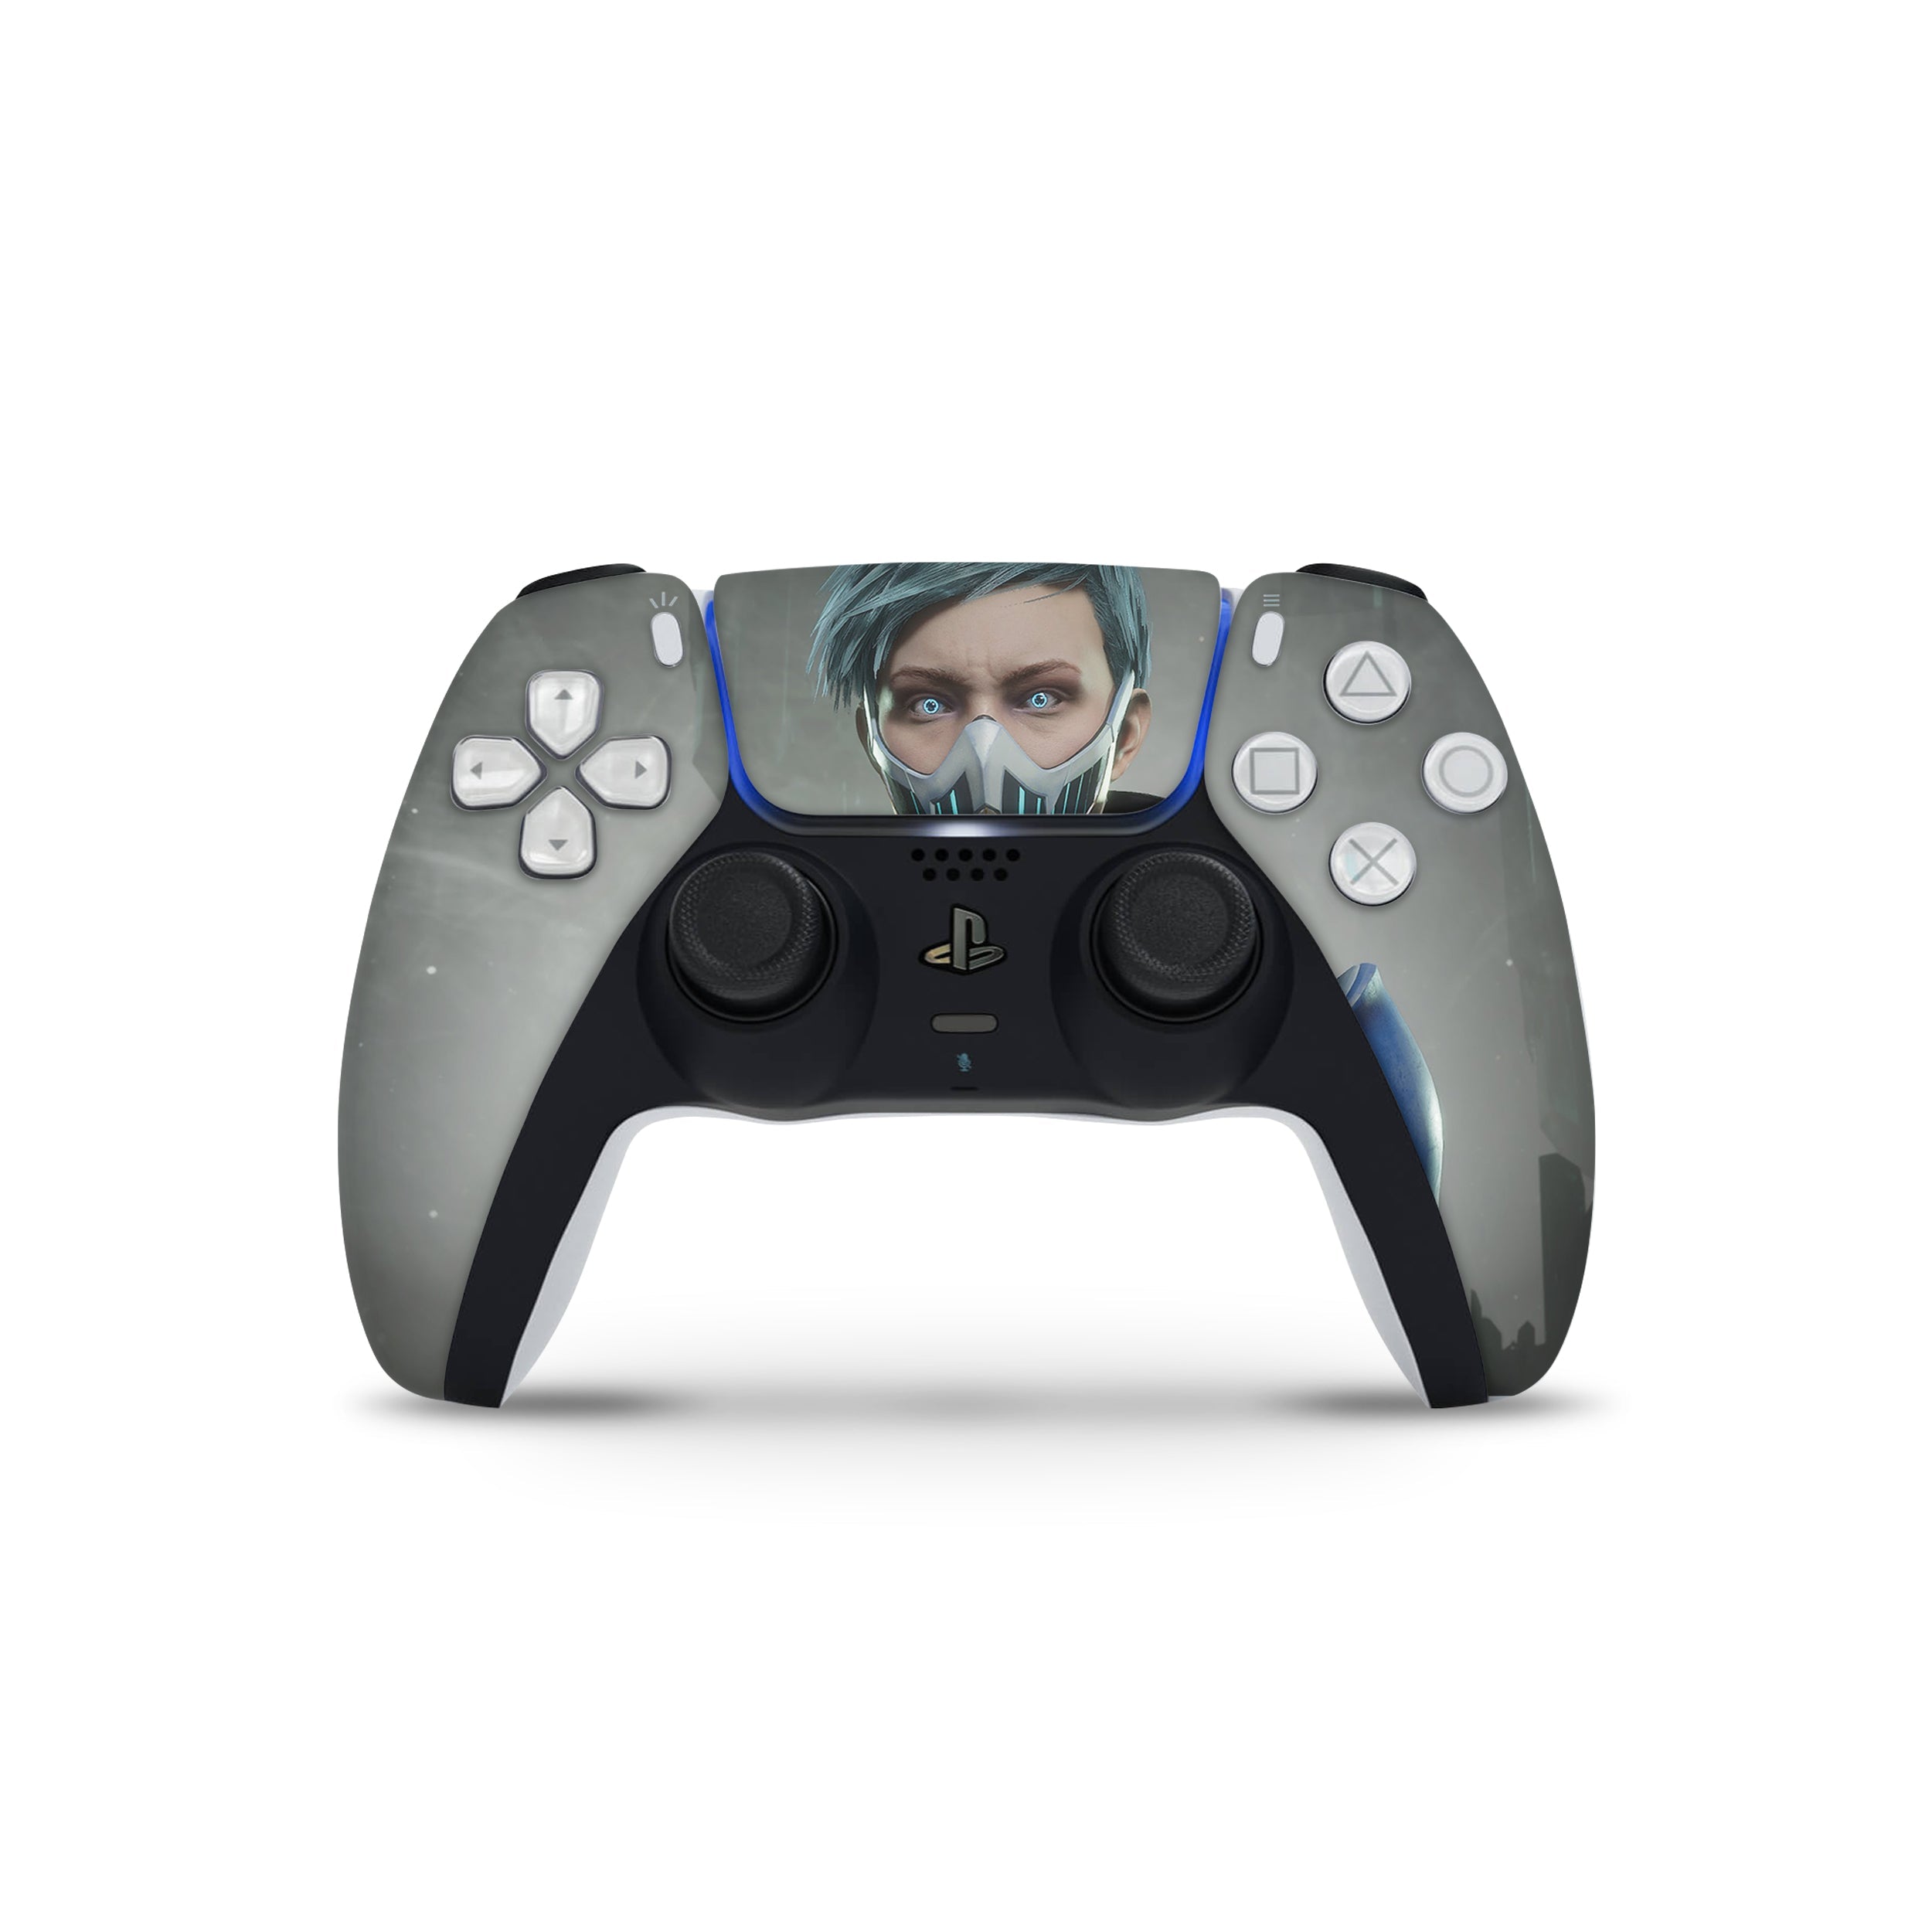 A video game skin featuring a Mortal Kombat 11 design for the PS5 DualSense Controller.